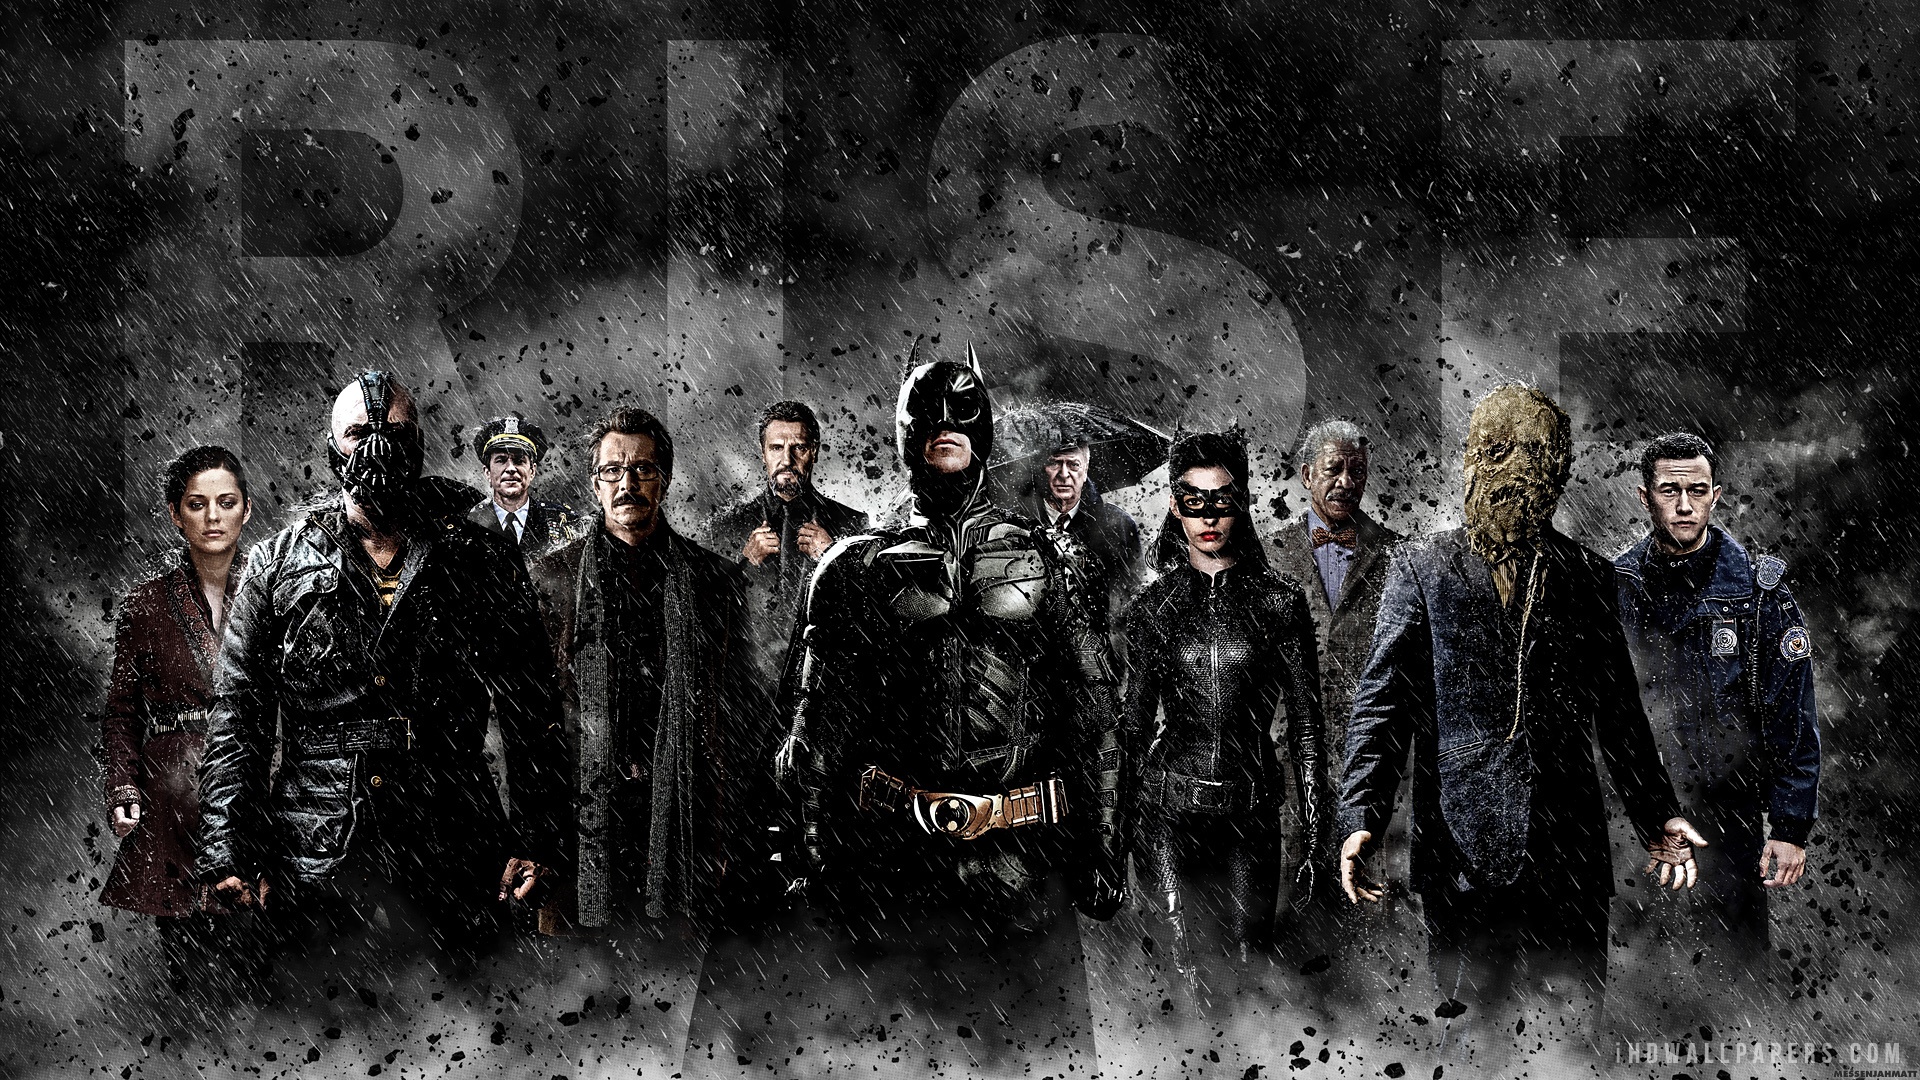 Download The Dark Knight Rises Cast wallpaper from the following